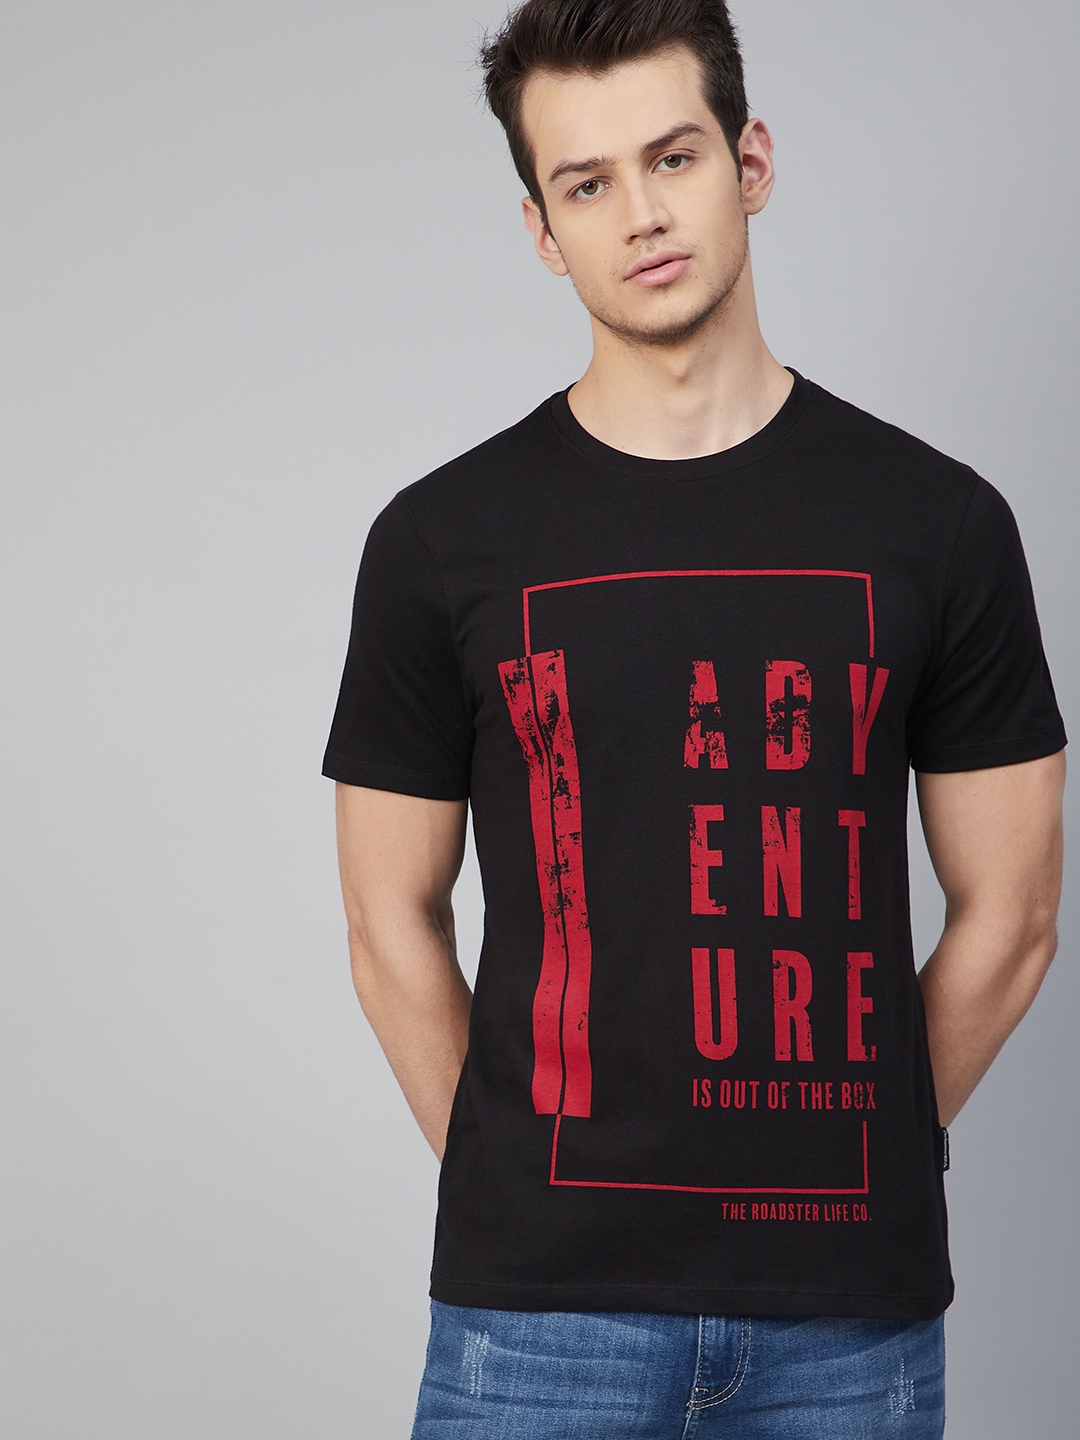 Buy The Roadster Lifestyle Co Men Black & Red Typography Printed T ...